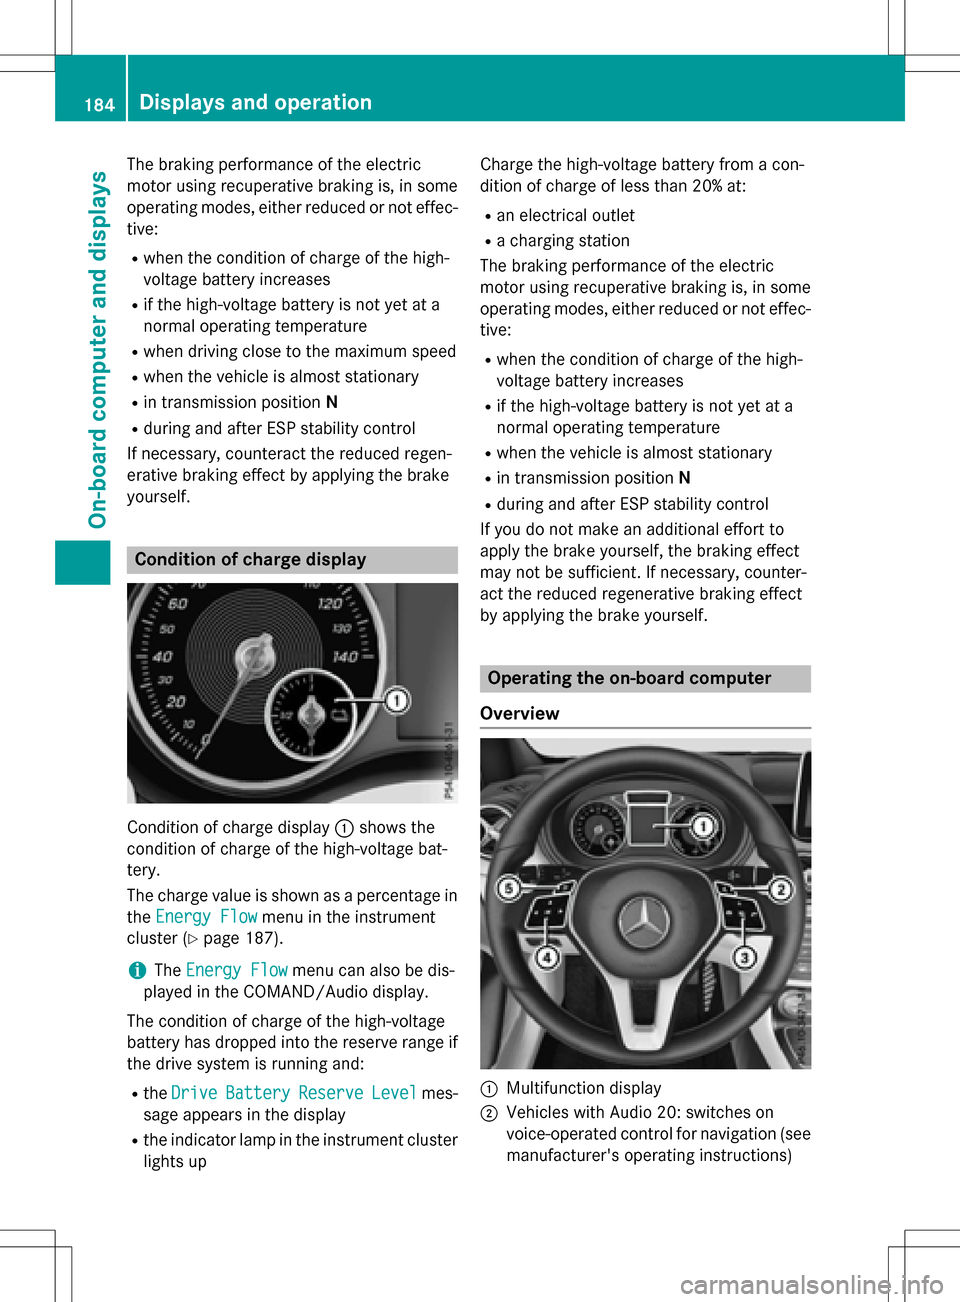 MERCEDES-BENZ B-Class ELECTRIC 2016 W246 Owners Manual The braking performance of the electric
motor using recuperative braking is, in some
operating modes, either reduced or not effec-
tive:
Rwhen the condition of charge of the high-
voltage battery incr